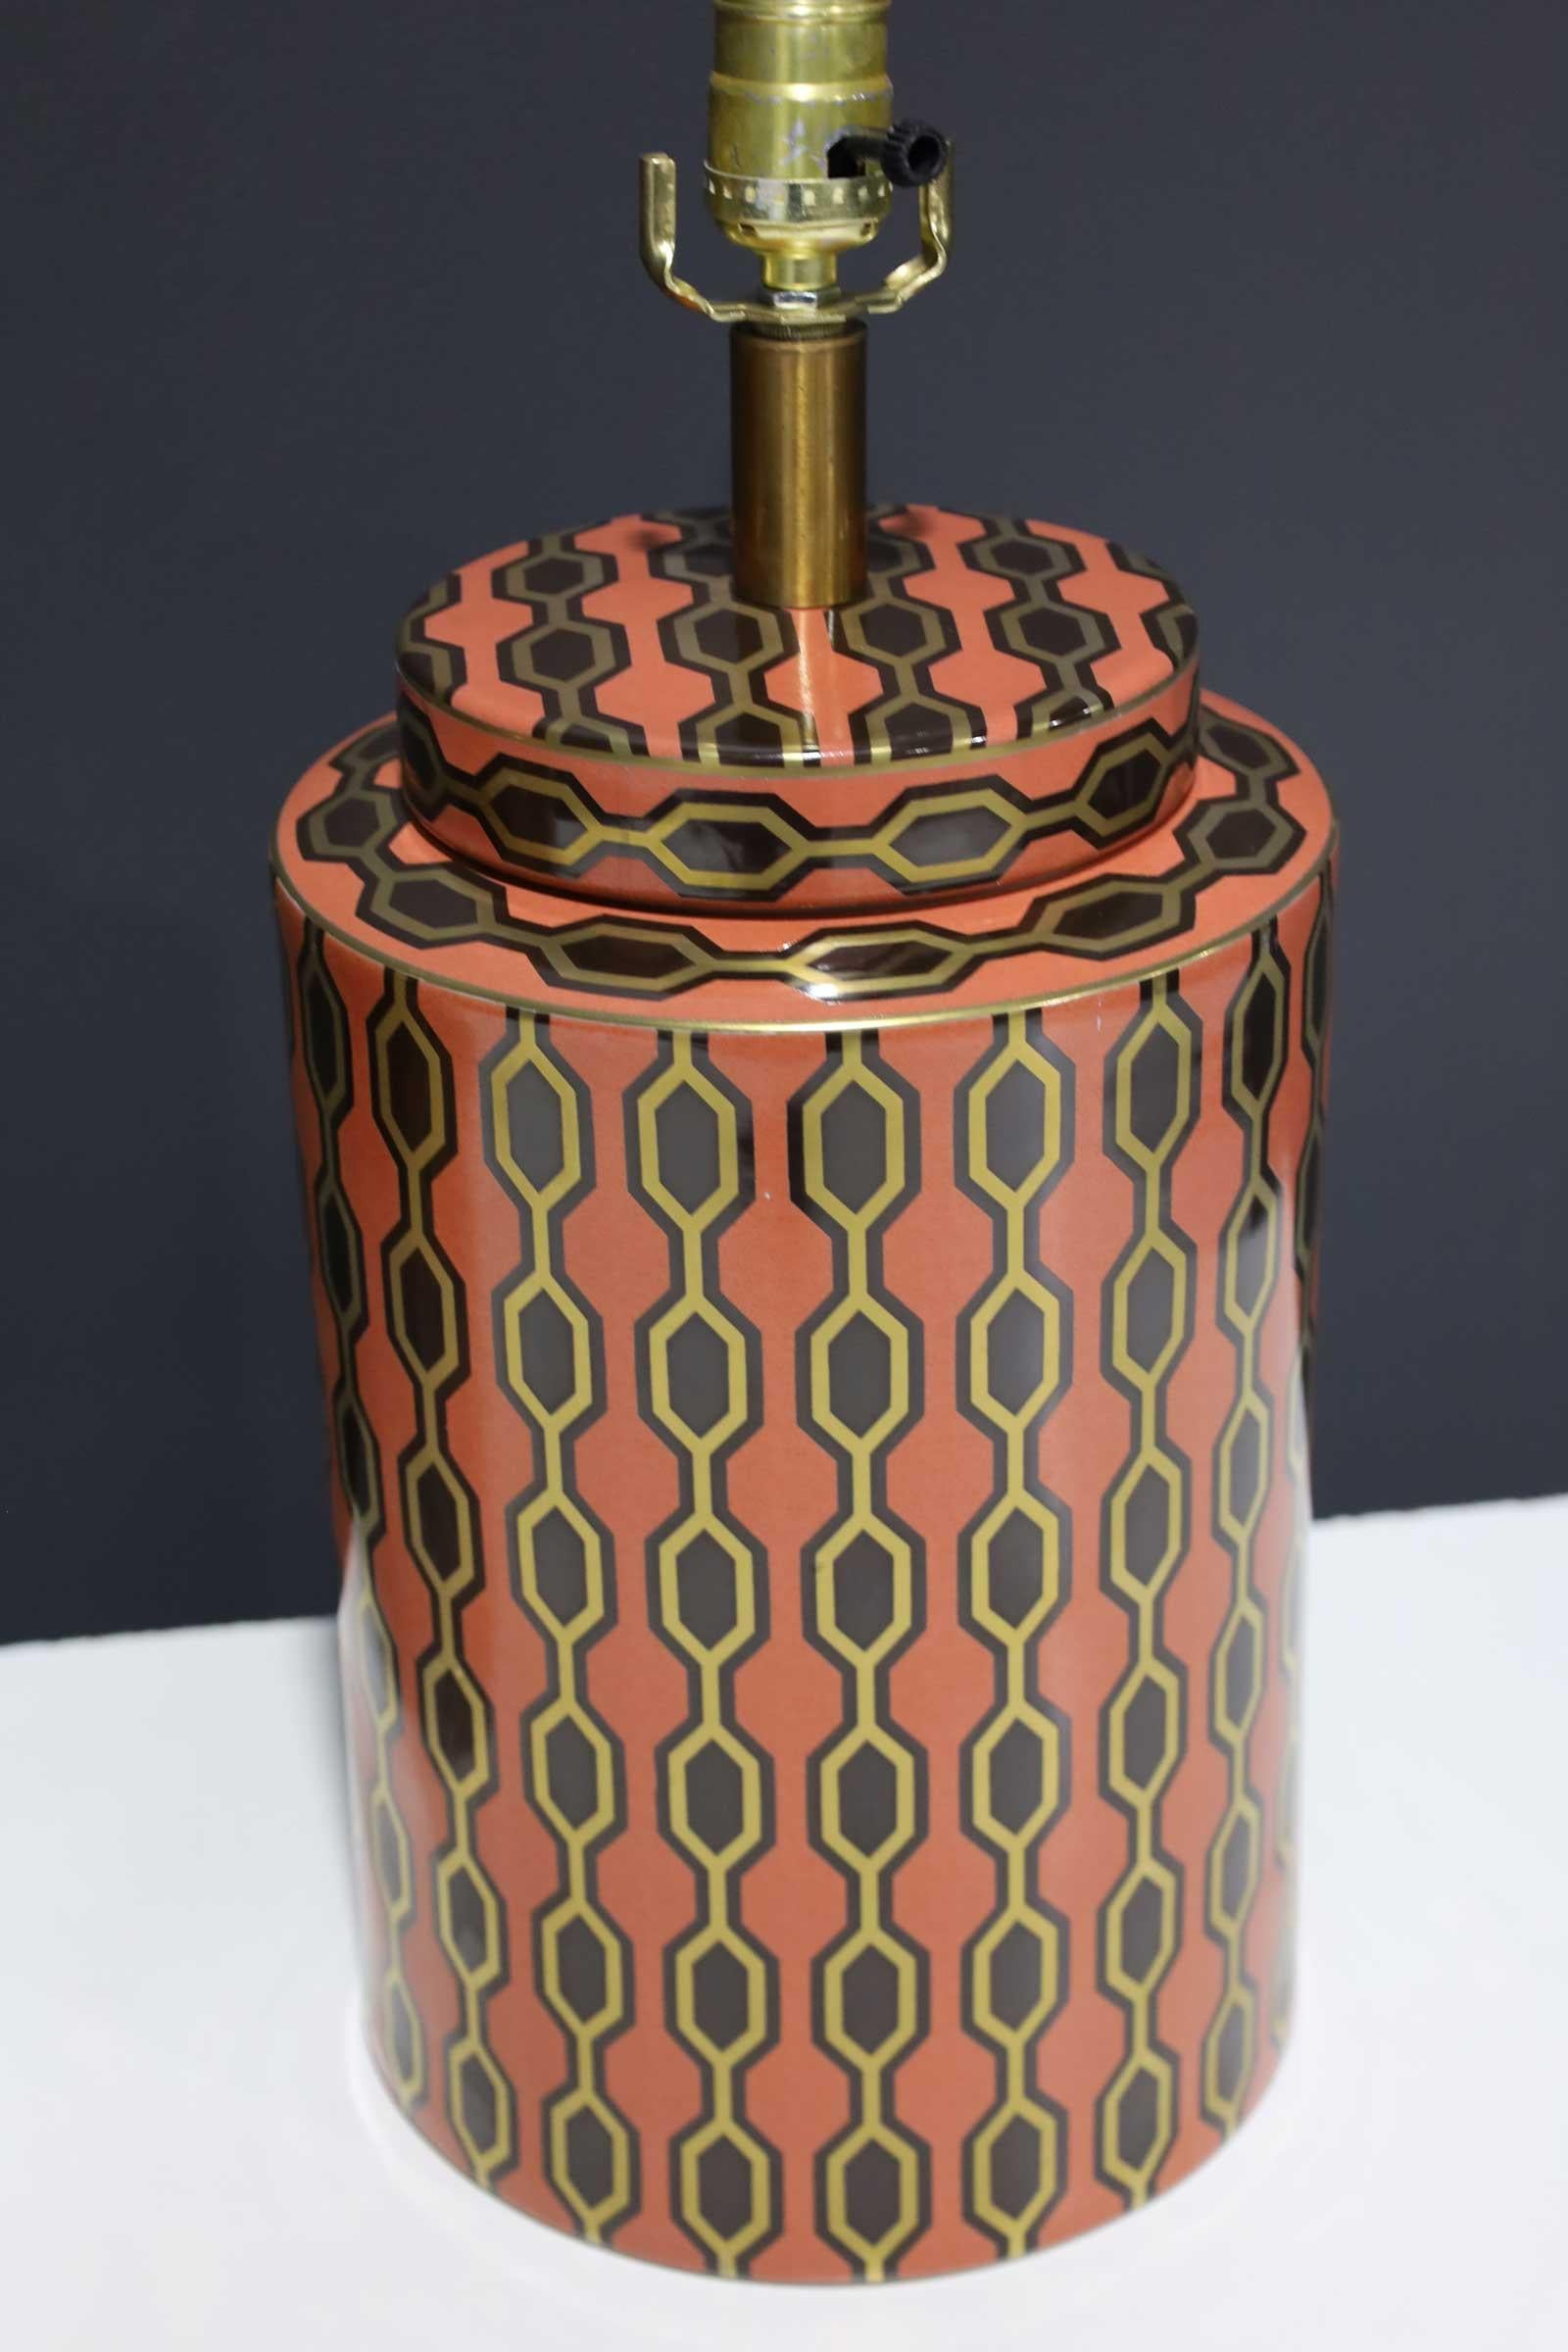 English Kelly Hoppen Porcelain Tea Jar Lamps in Orange, Gold and Brown Geometric Pattern For Sale